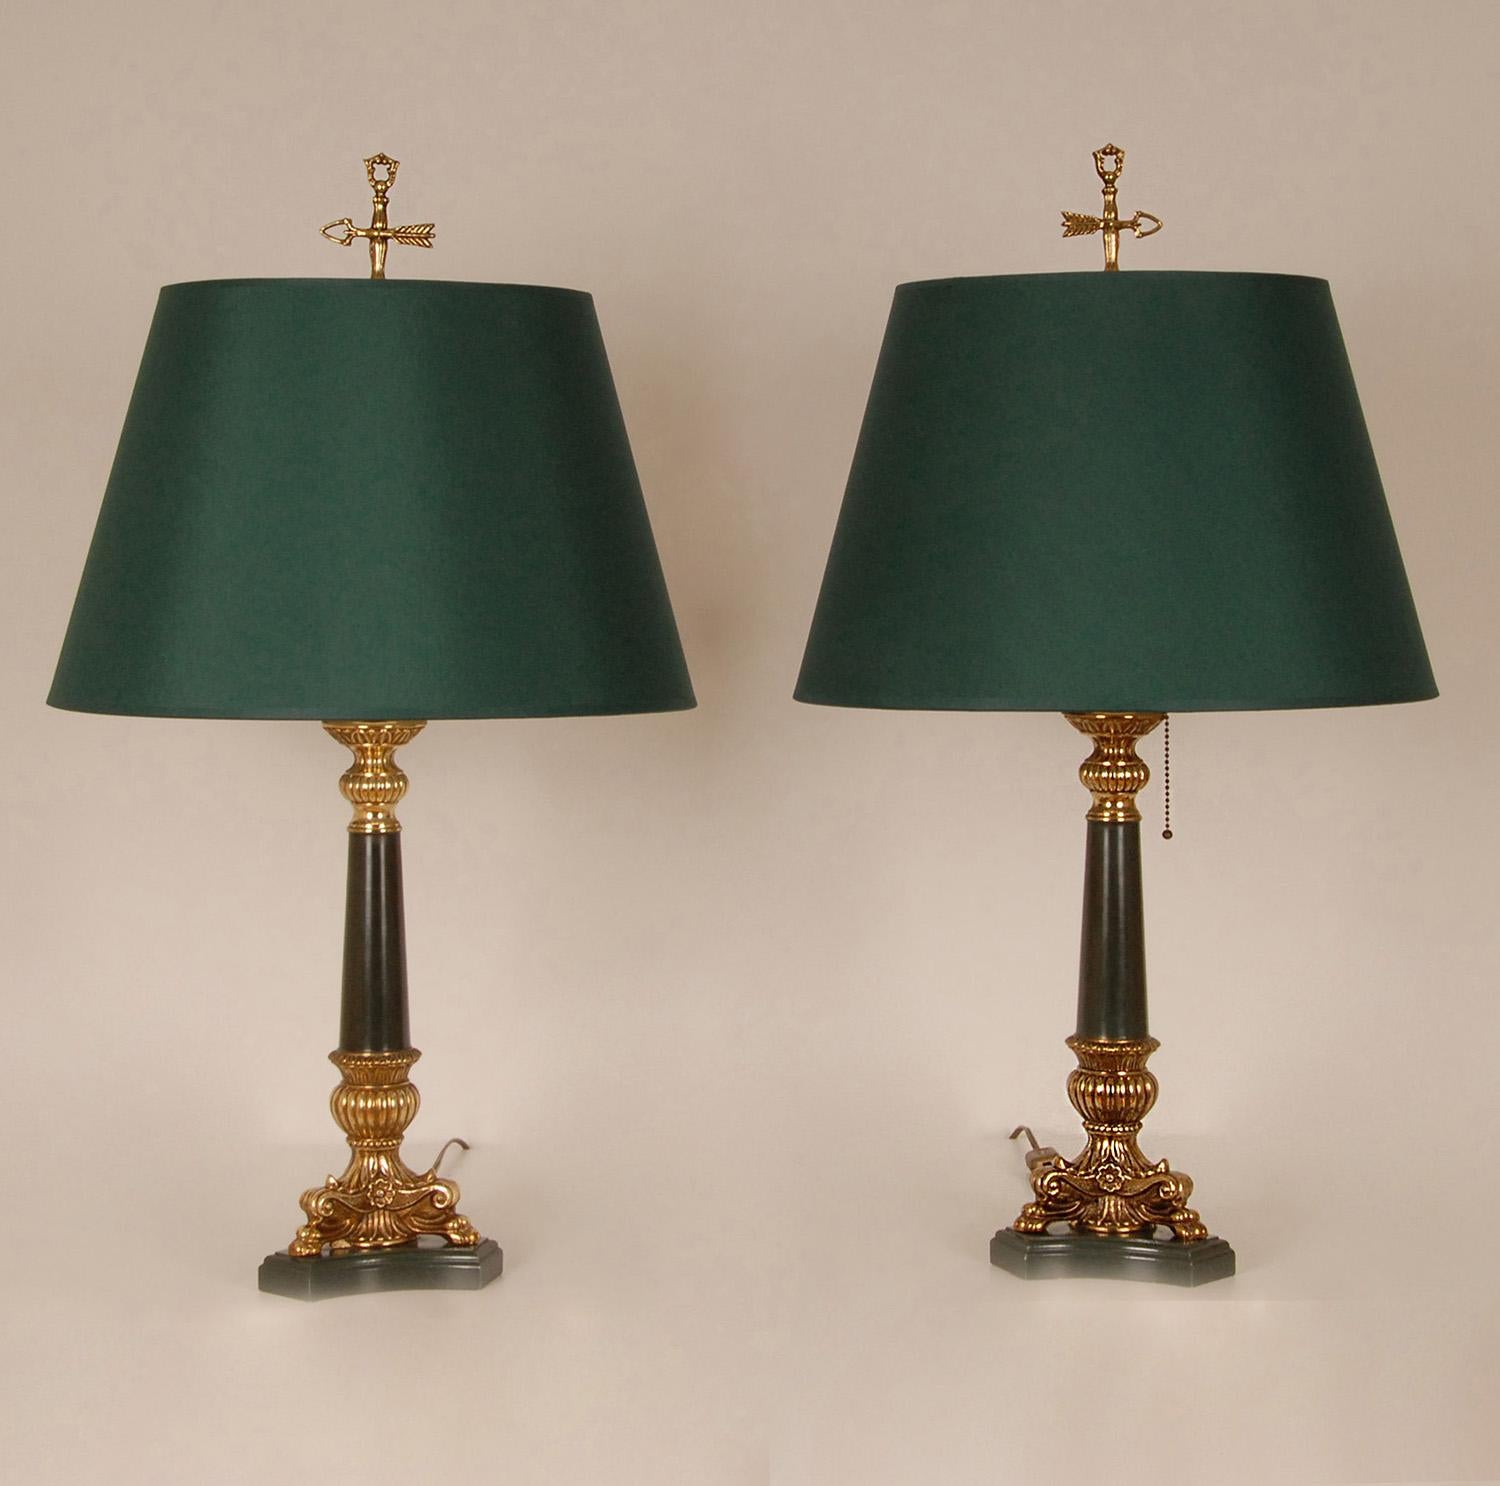 French Bouillotte Lamps Napoleonic Empire Green Gold Gilded Vintage Table Lamps For Sale 6